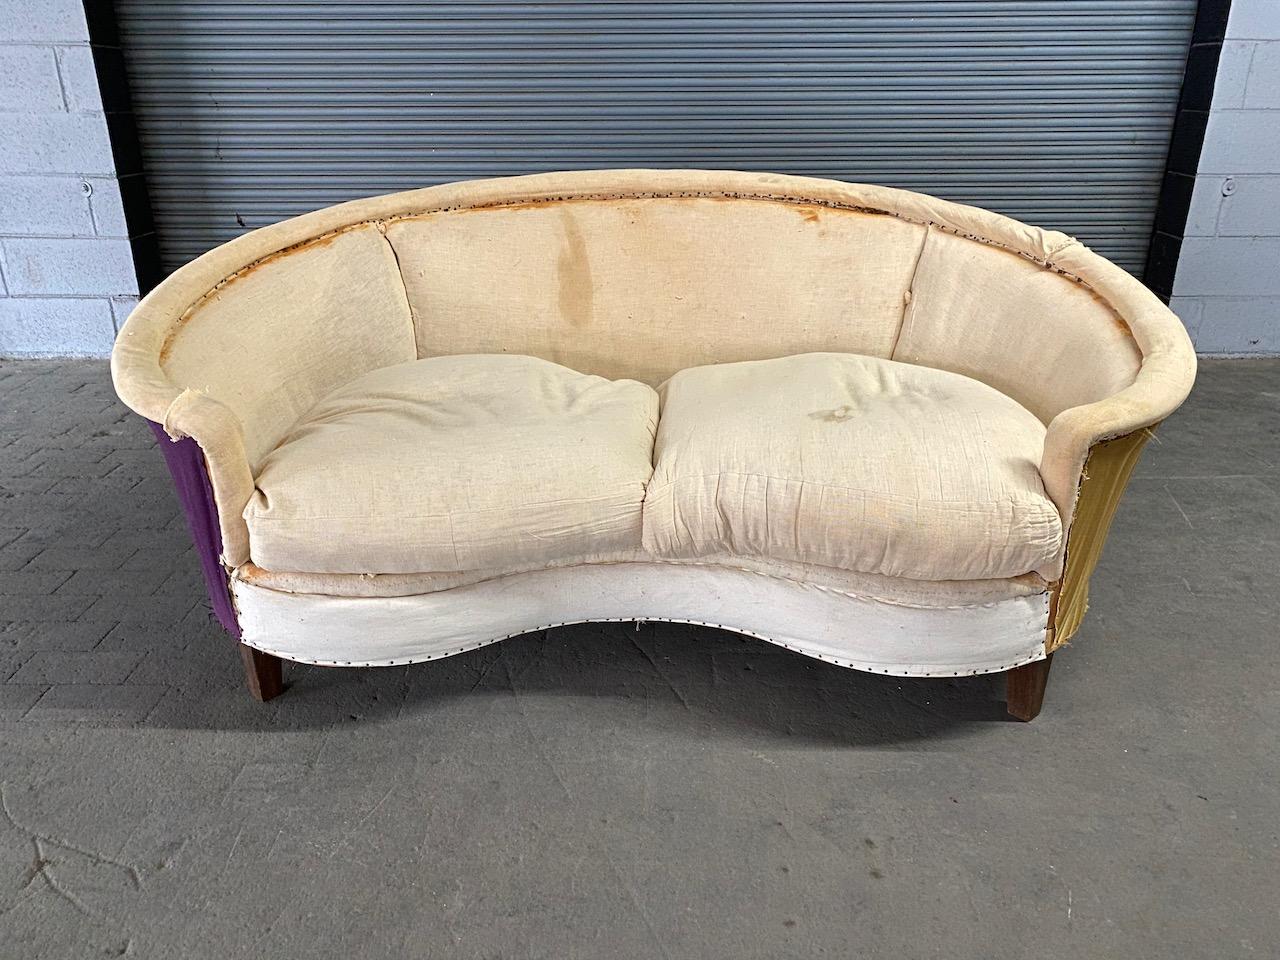 An unusual curved back sofa with loose down filled seat cushions and a tight back, tapered legs that may have been skirted. This sofa will be stunning once upholstered. French 1940s-1950s. 

Sold as is.

Measures: 30.5” H x 68.5” L x 41” D, 17” seat